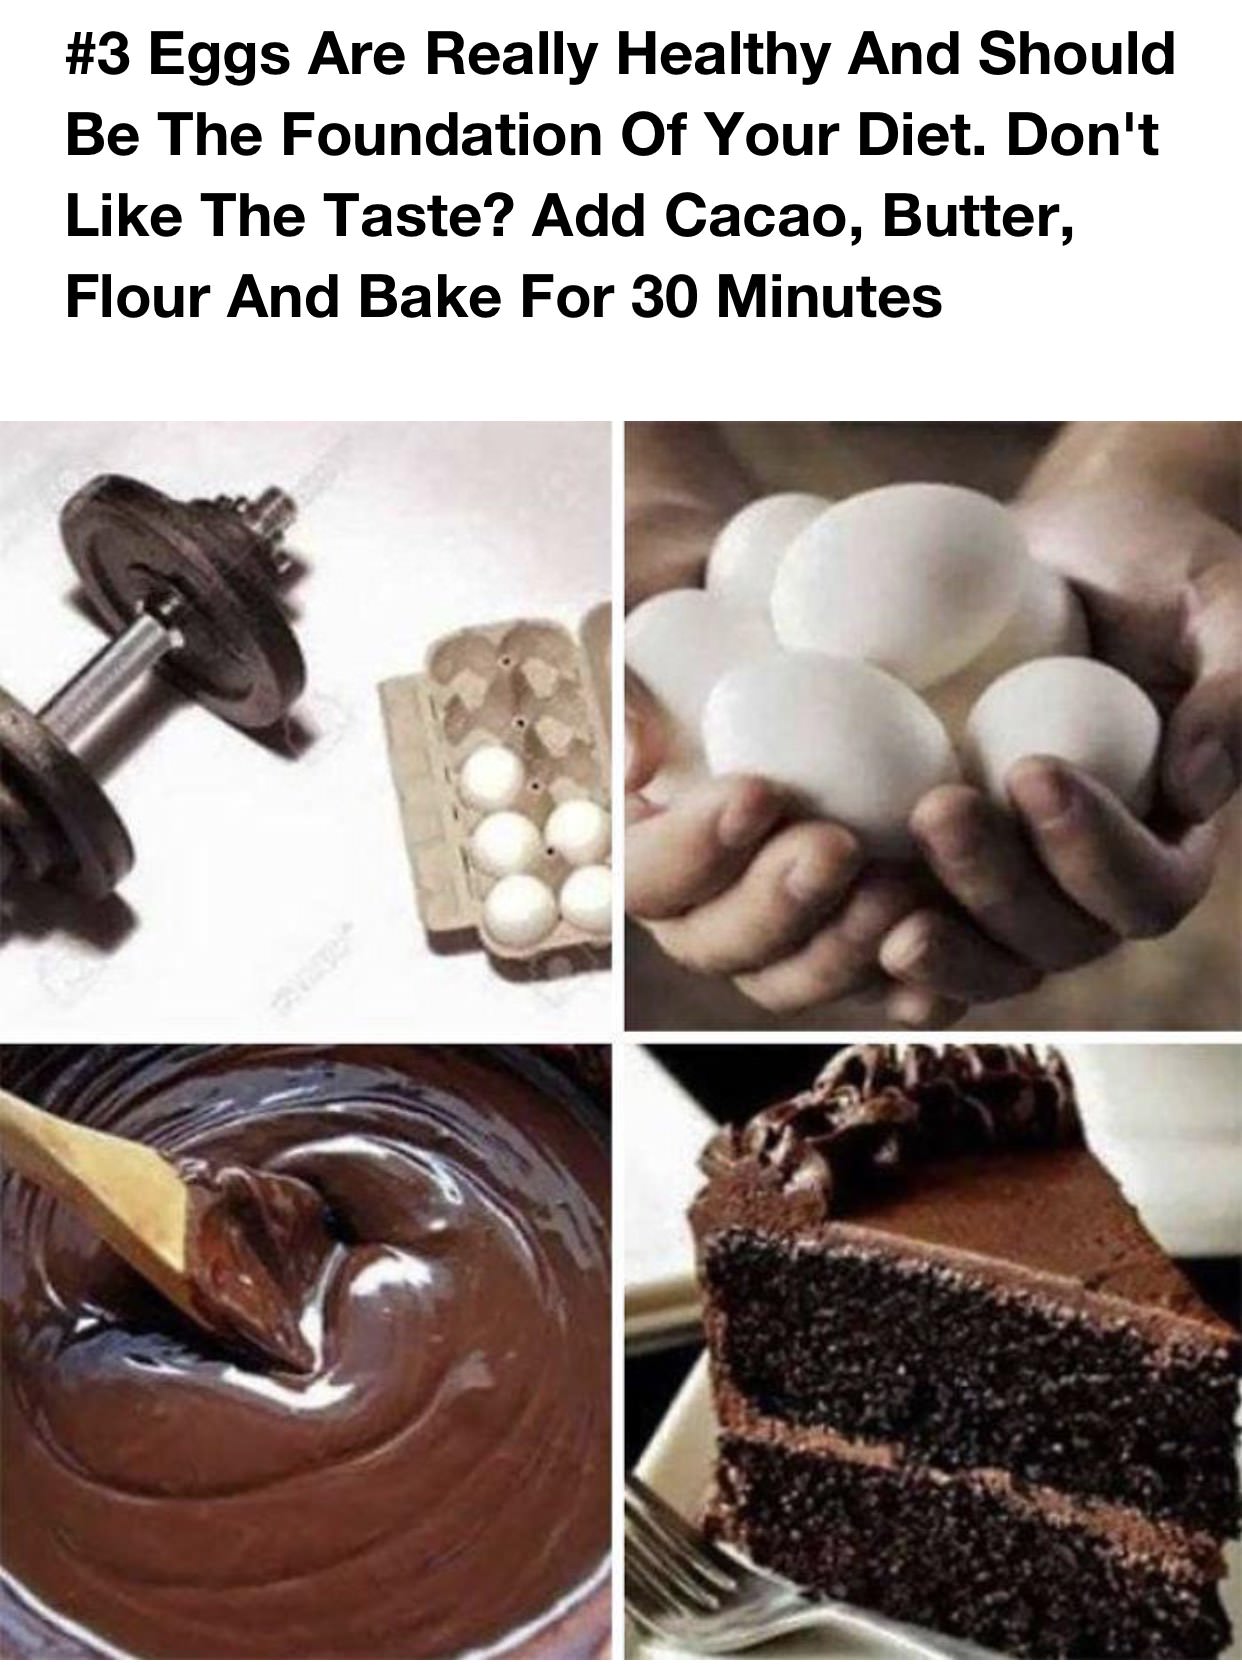 absurd life hack - Eggs Are Really Healthy And Should Be The Foundation Of Your Diet. Don't The Taste? Add Cacao, Butter, Flour And Bake For 30 Minutes